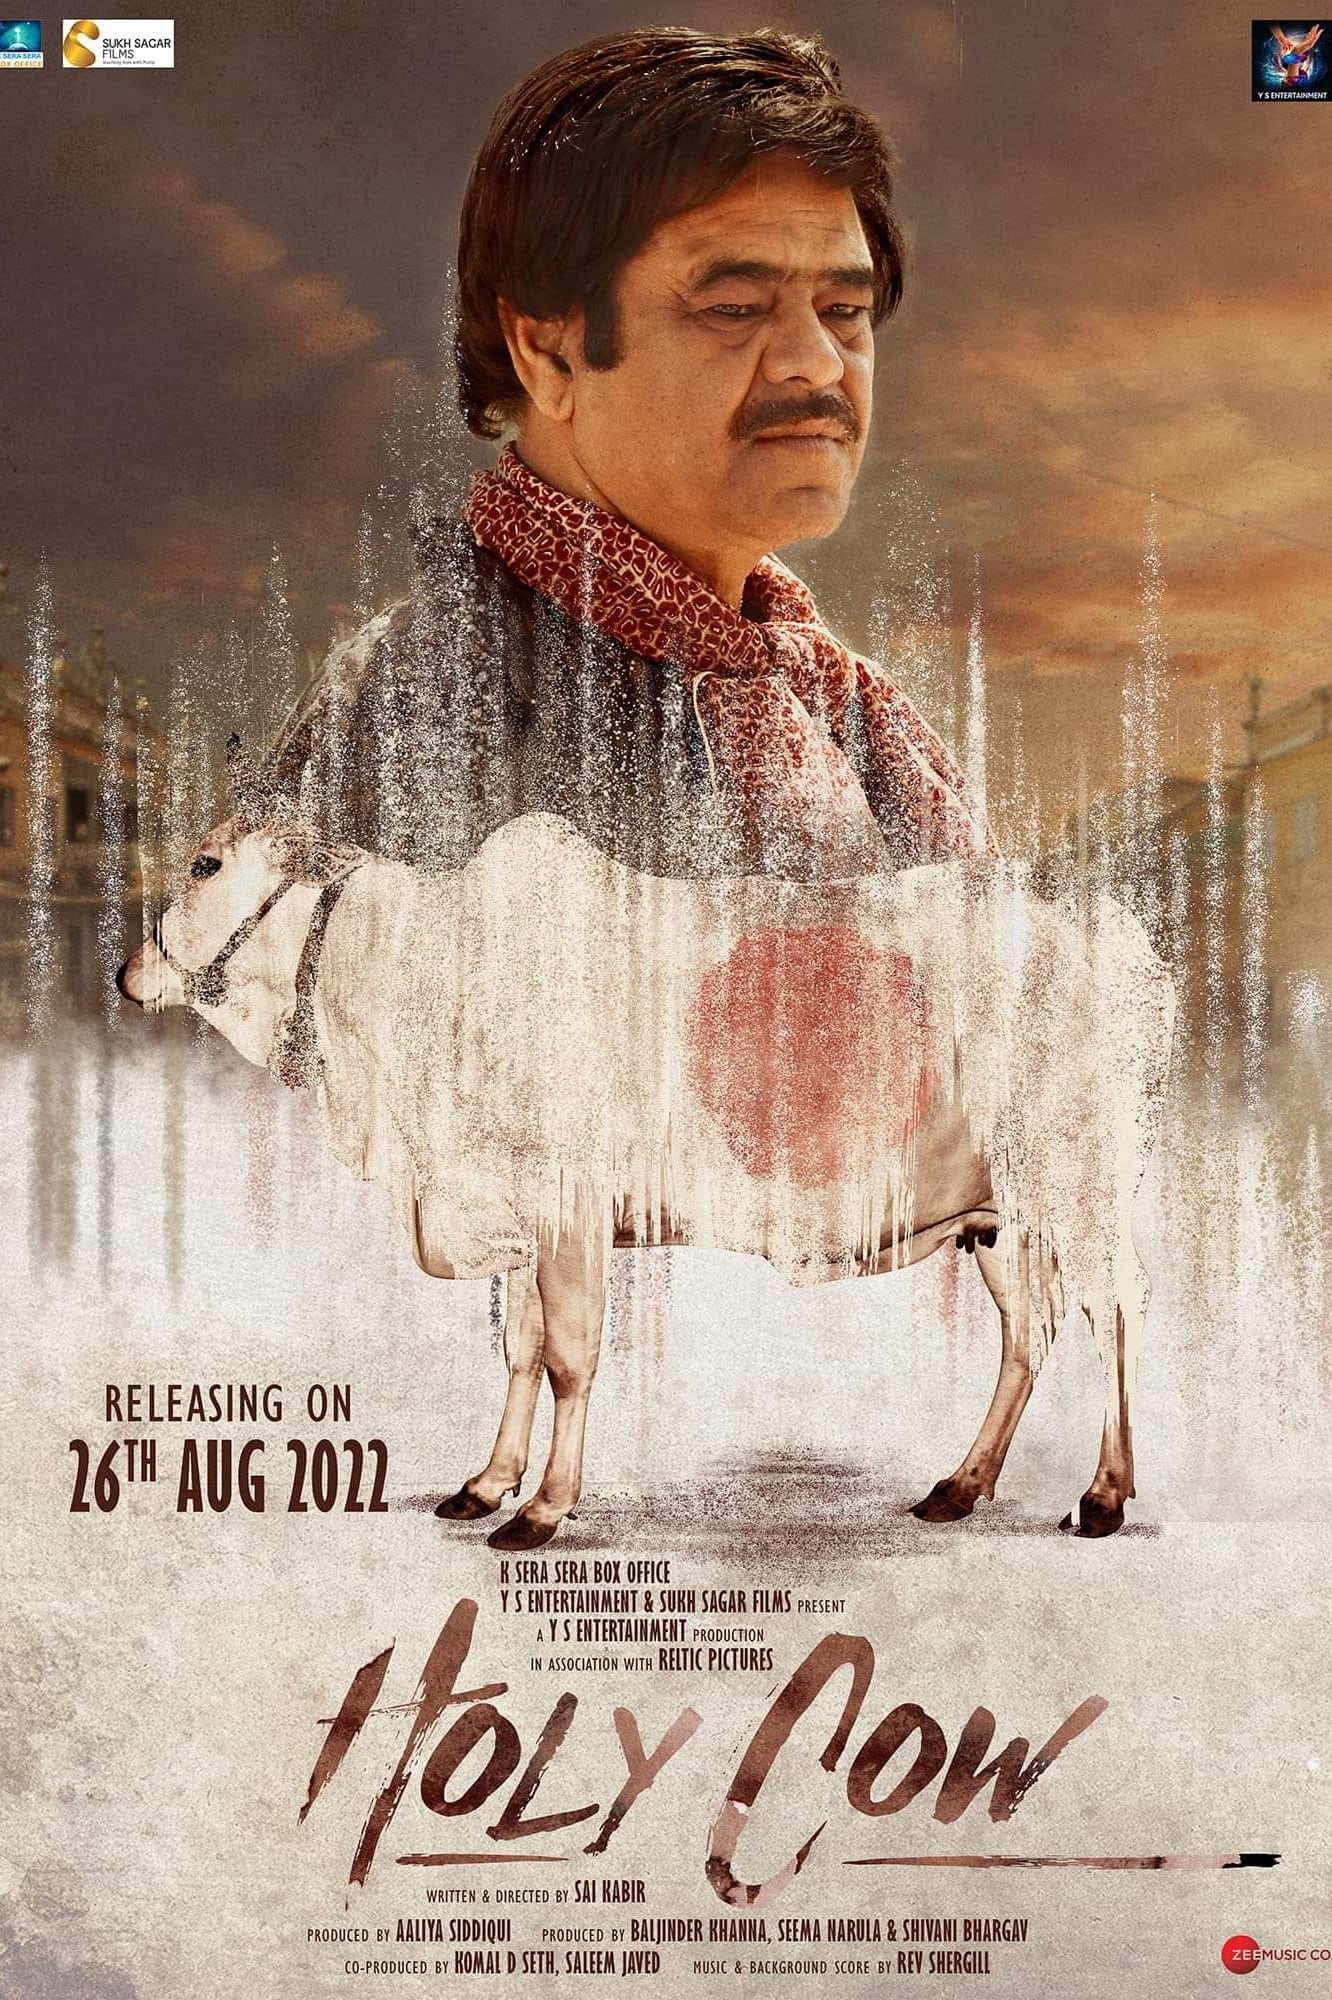 Poster for the movie "Holy Cow"